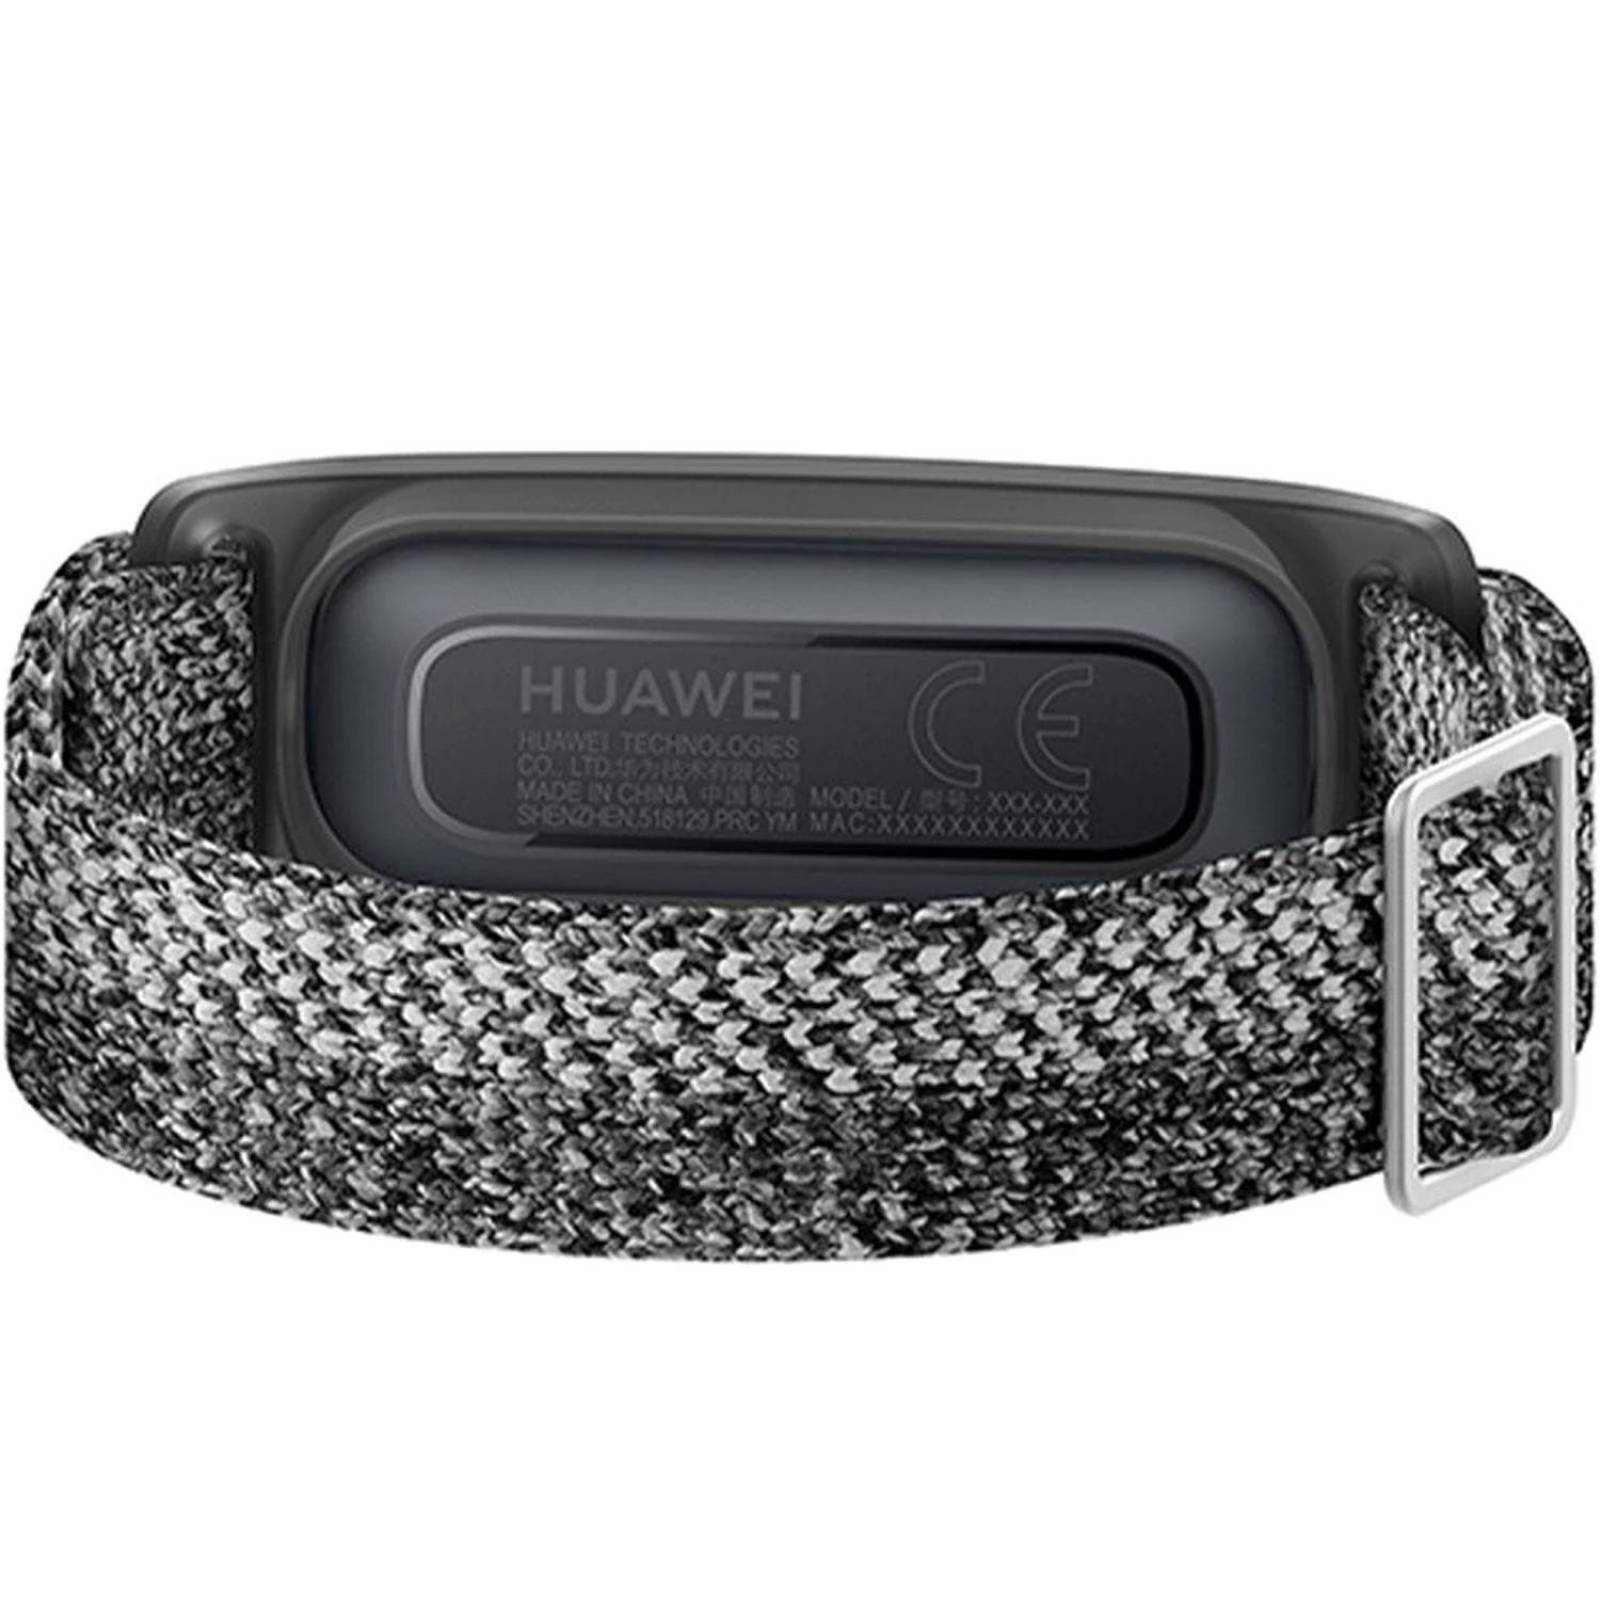 Smartband HUAWEI Band 4E AW70 Touch Bluetooth Android 